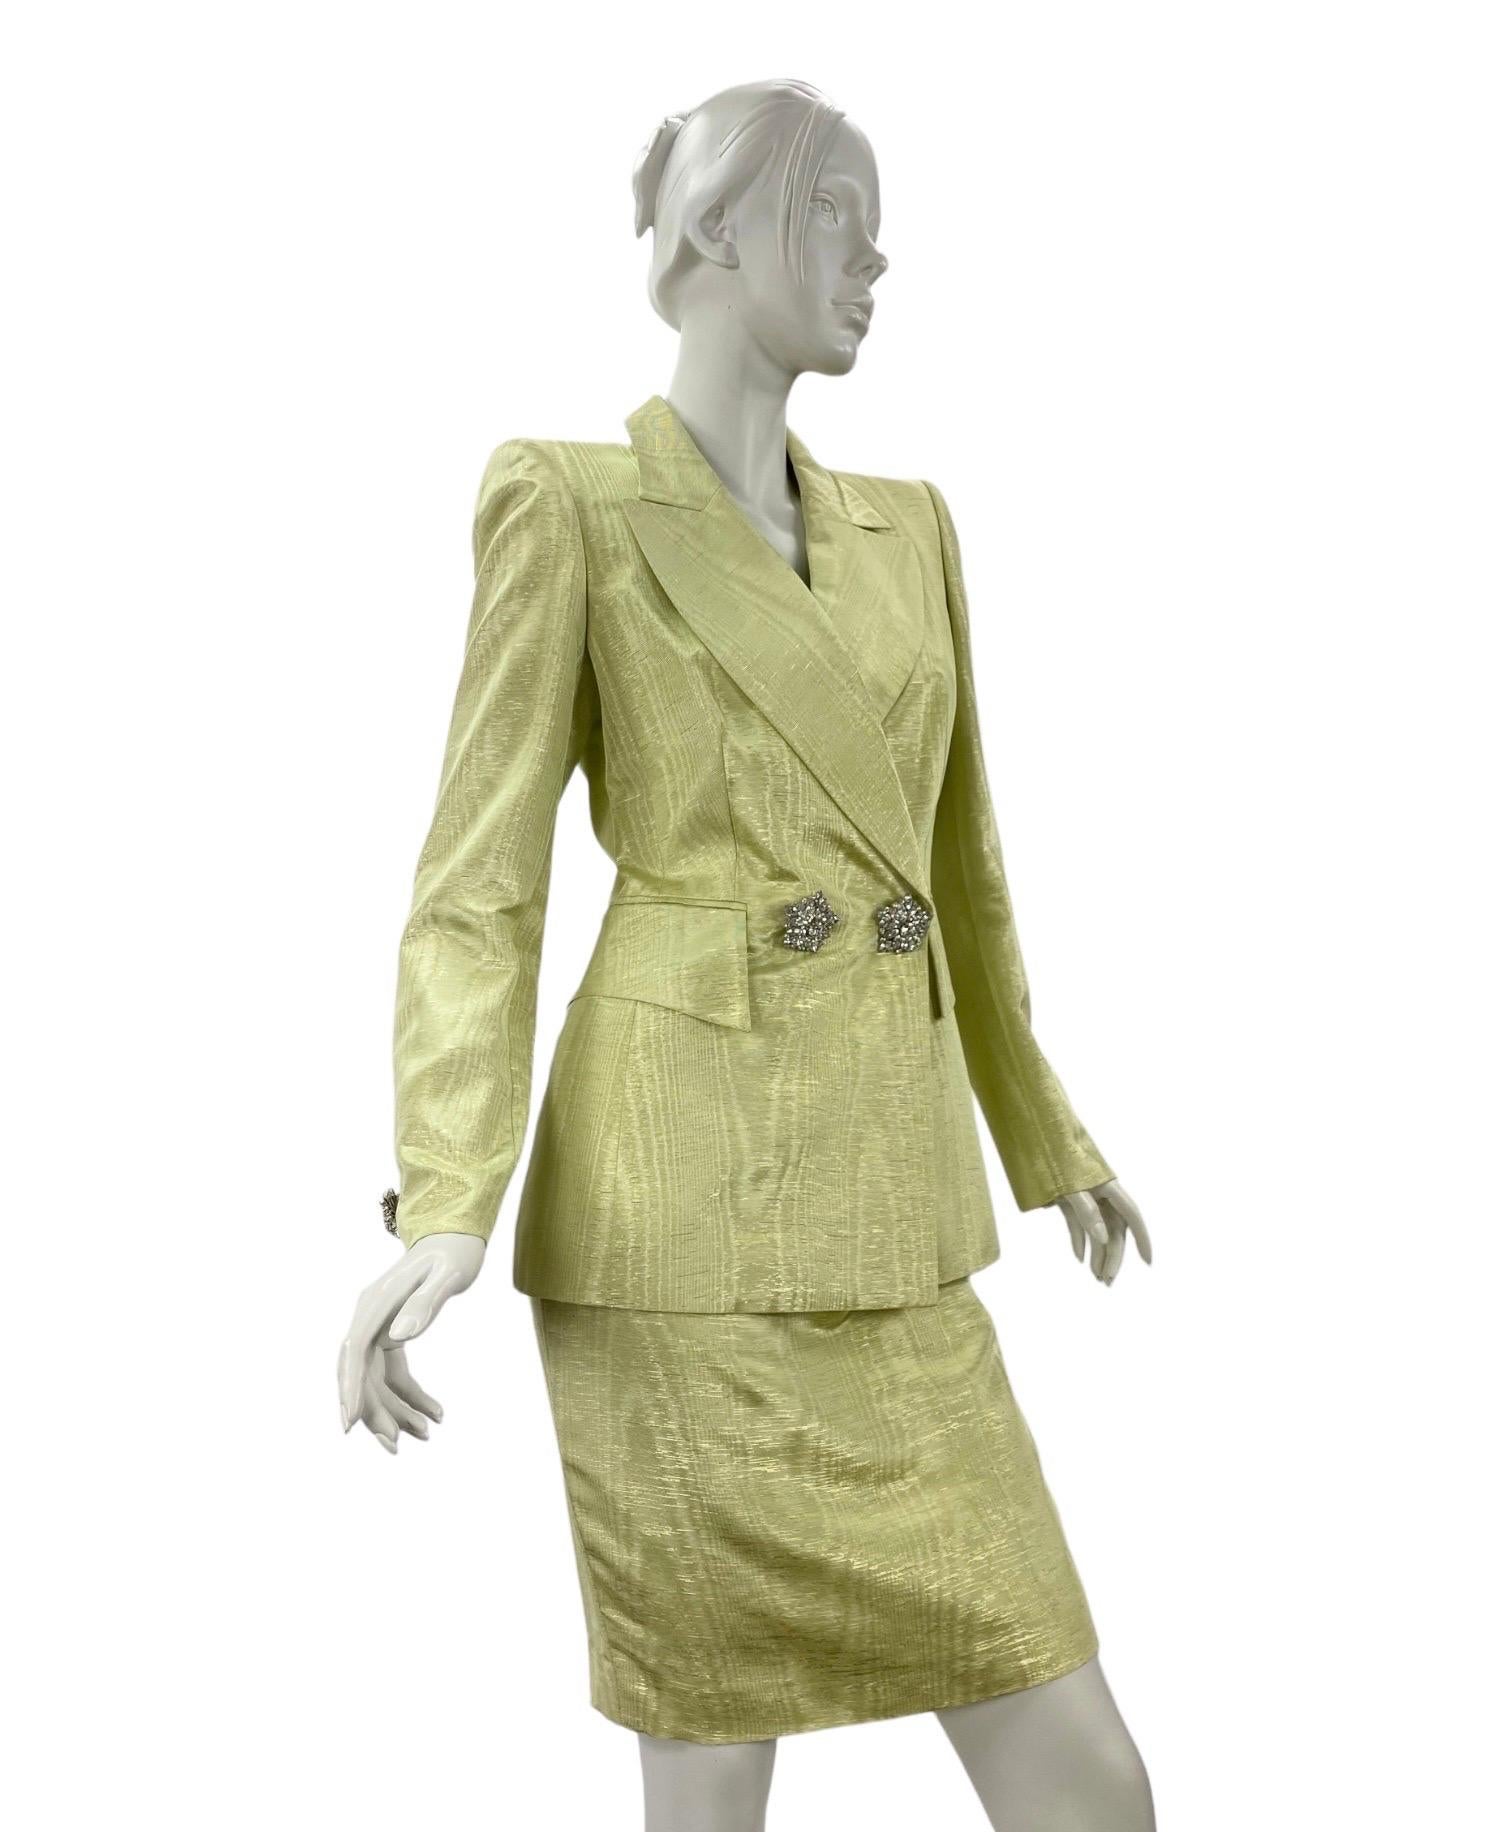 90-s Vintage Escada Couture Crystal Embellished Moire Skirt Suit 
Color: Green Apple with Gold finish
Crystal Buttons, Fully lined
Size 34
New, with tags
Excellent condition